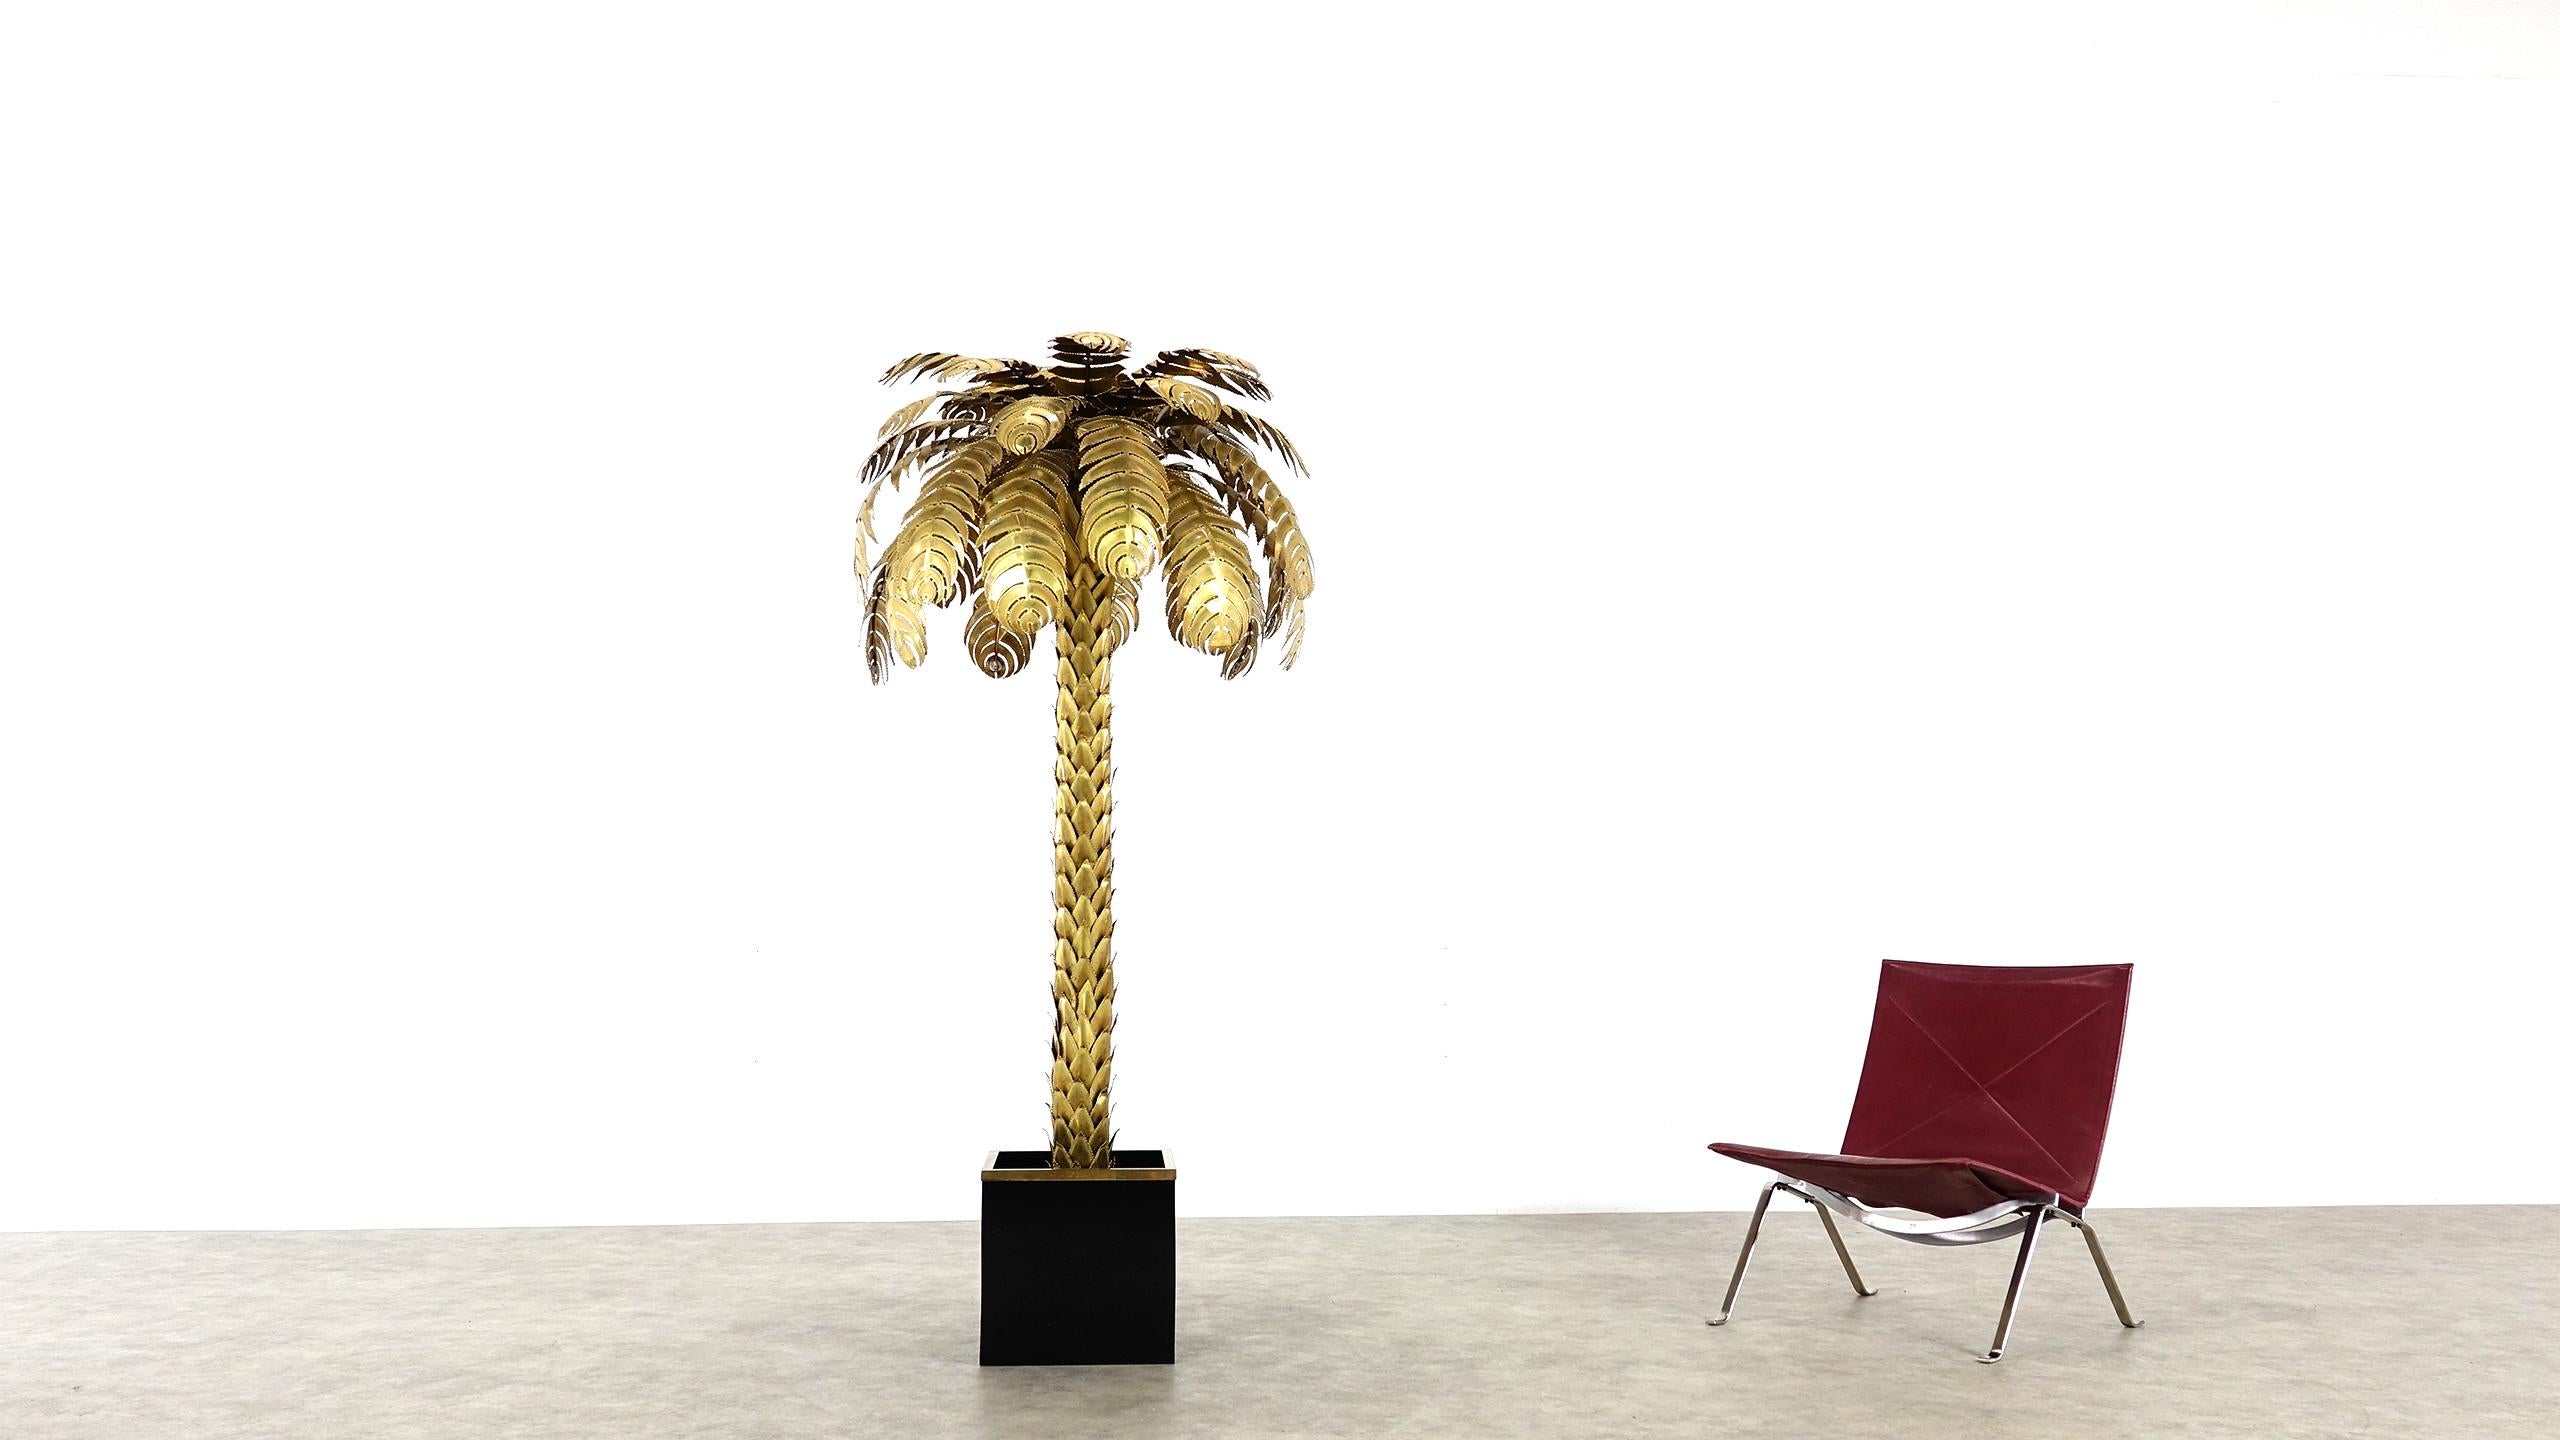 Floor lamp in the form of a palm tree, French design by Atelier Techoueyres for Maison Charles. Design by 1970. Construction with leaves and stem made of brass sheet, bucket with sides of black formica edging and brass. Equipped with five